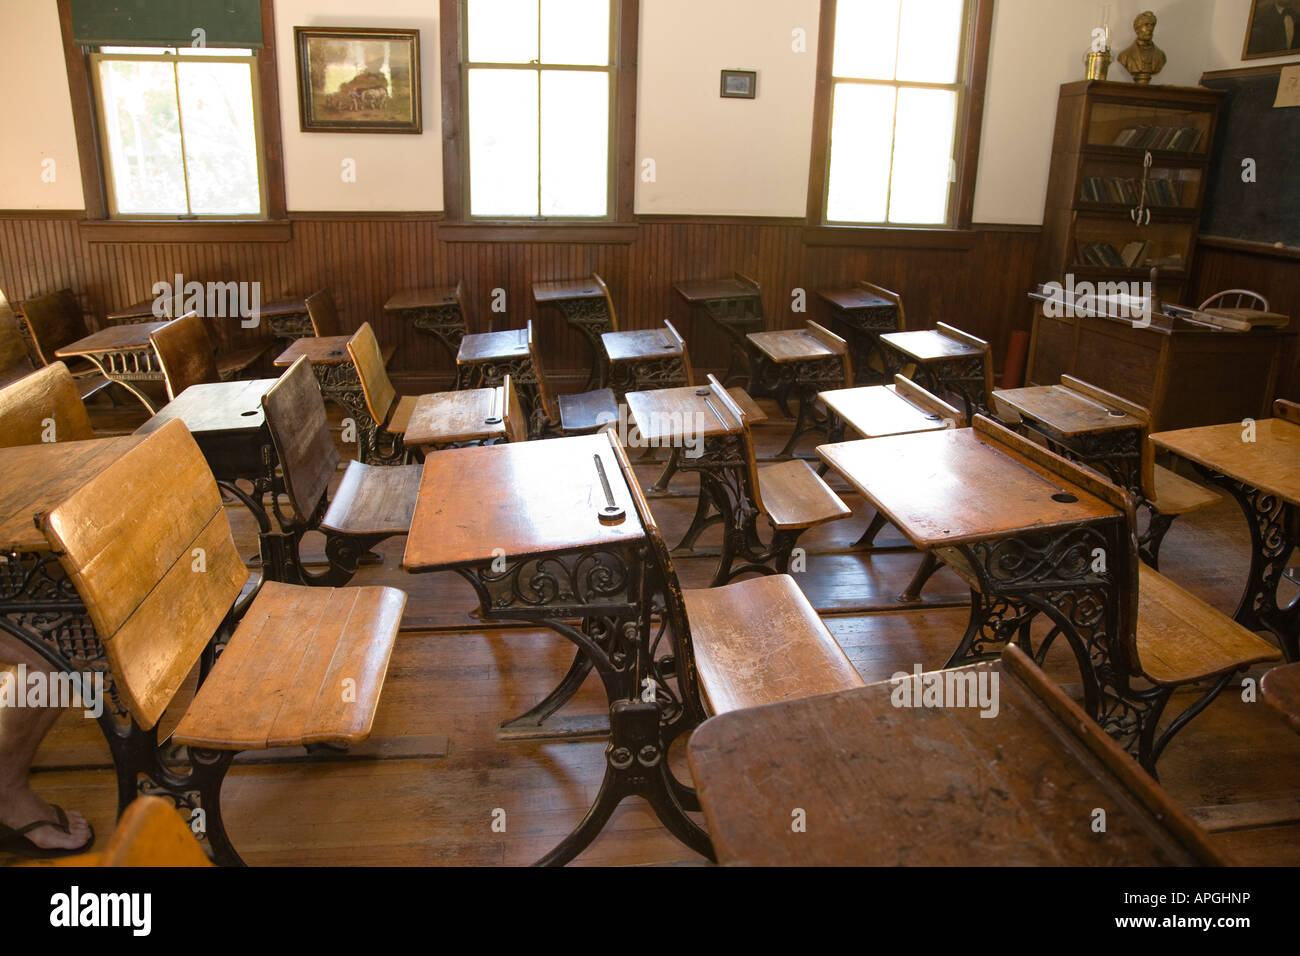 Illinois Rockford Wooden Desks With Inkwell For Students In Rows